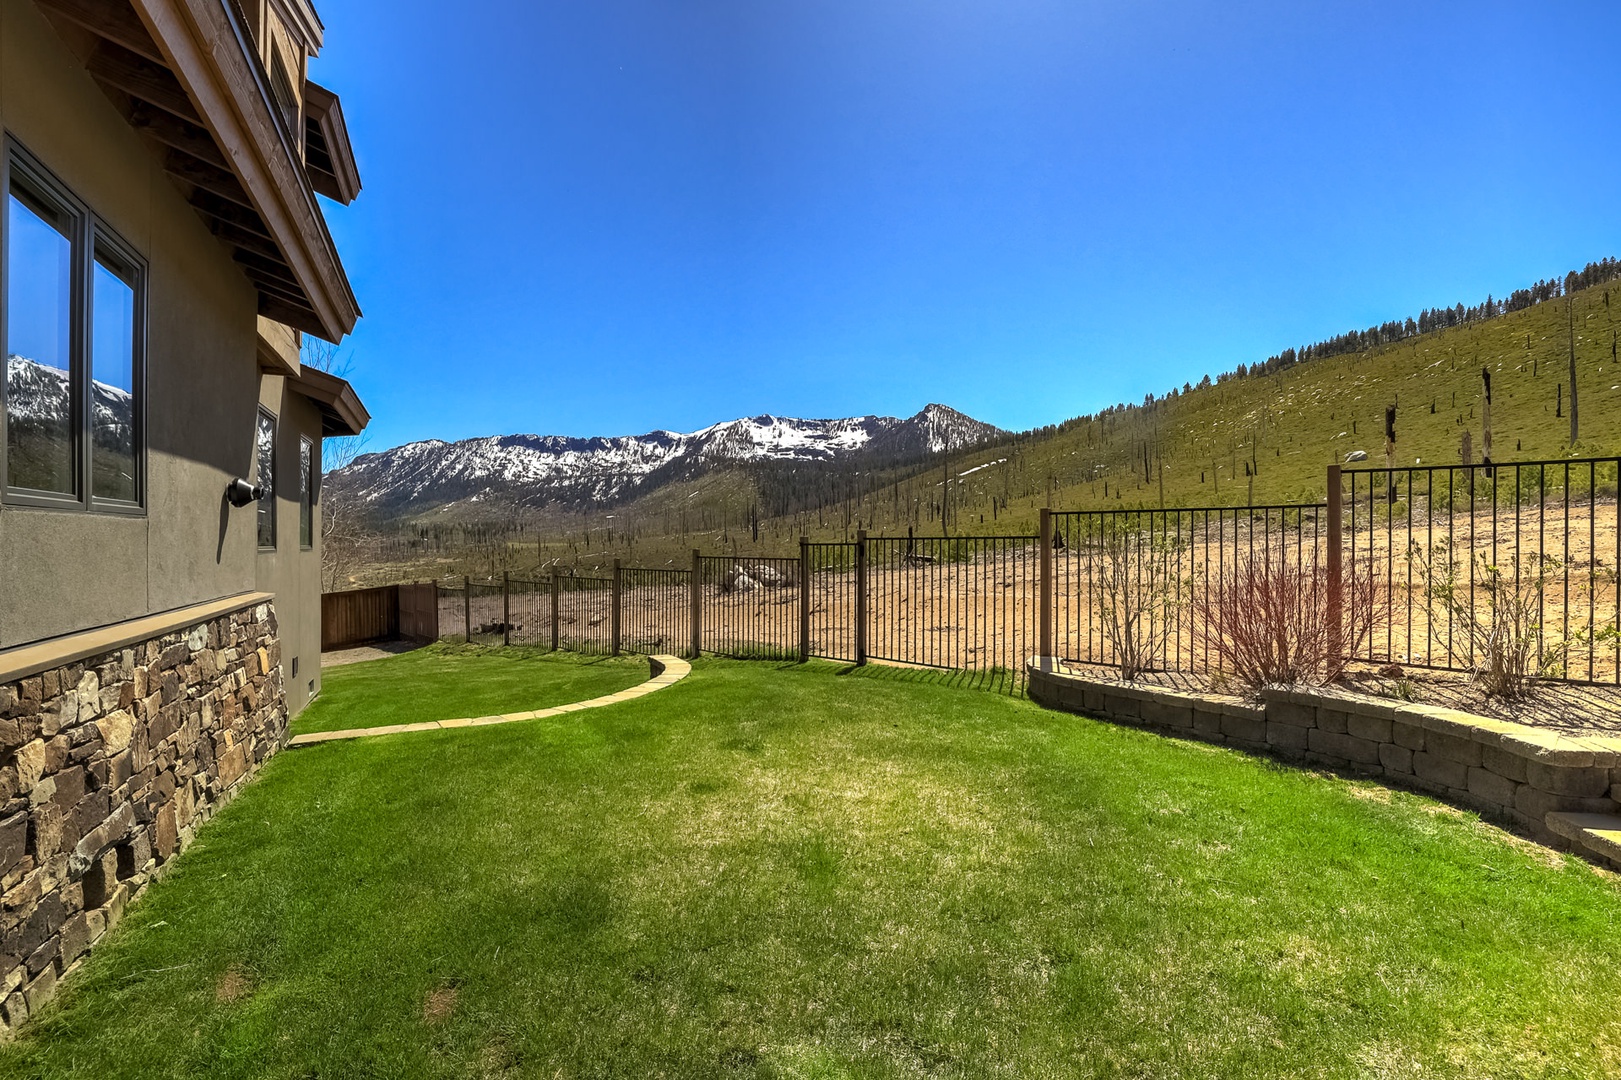 Spacious backyard with gate access for a walkabout